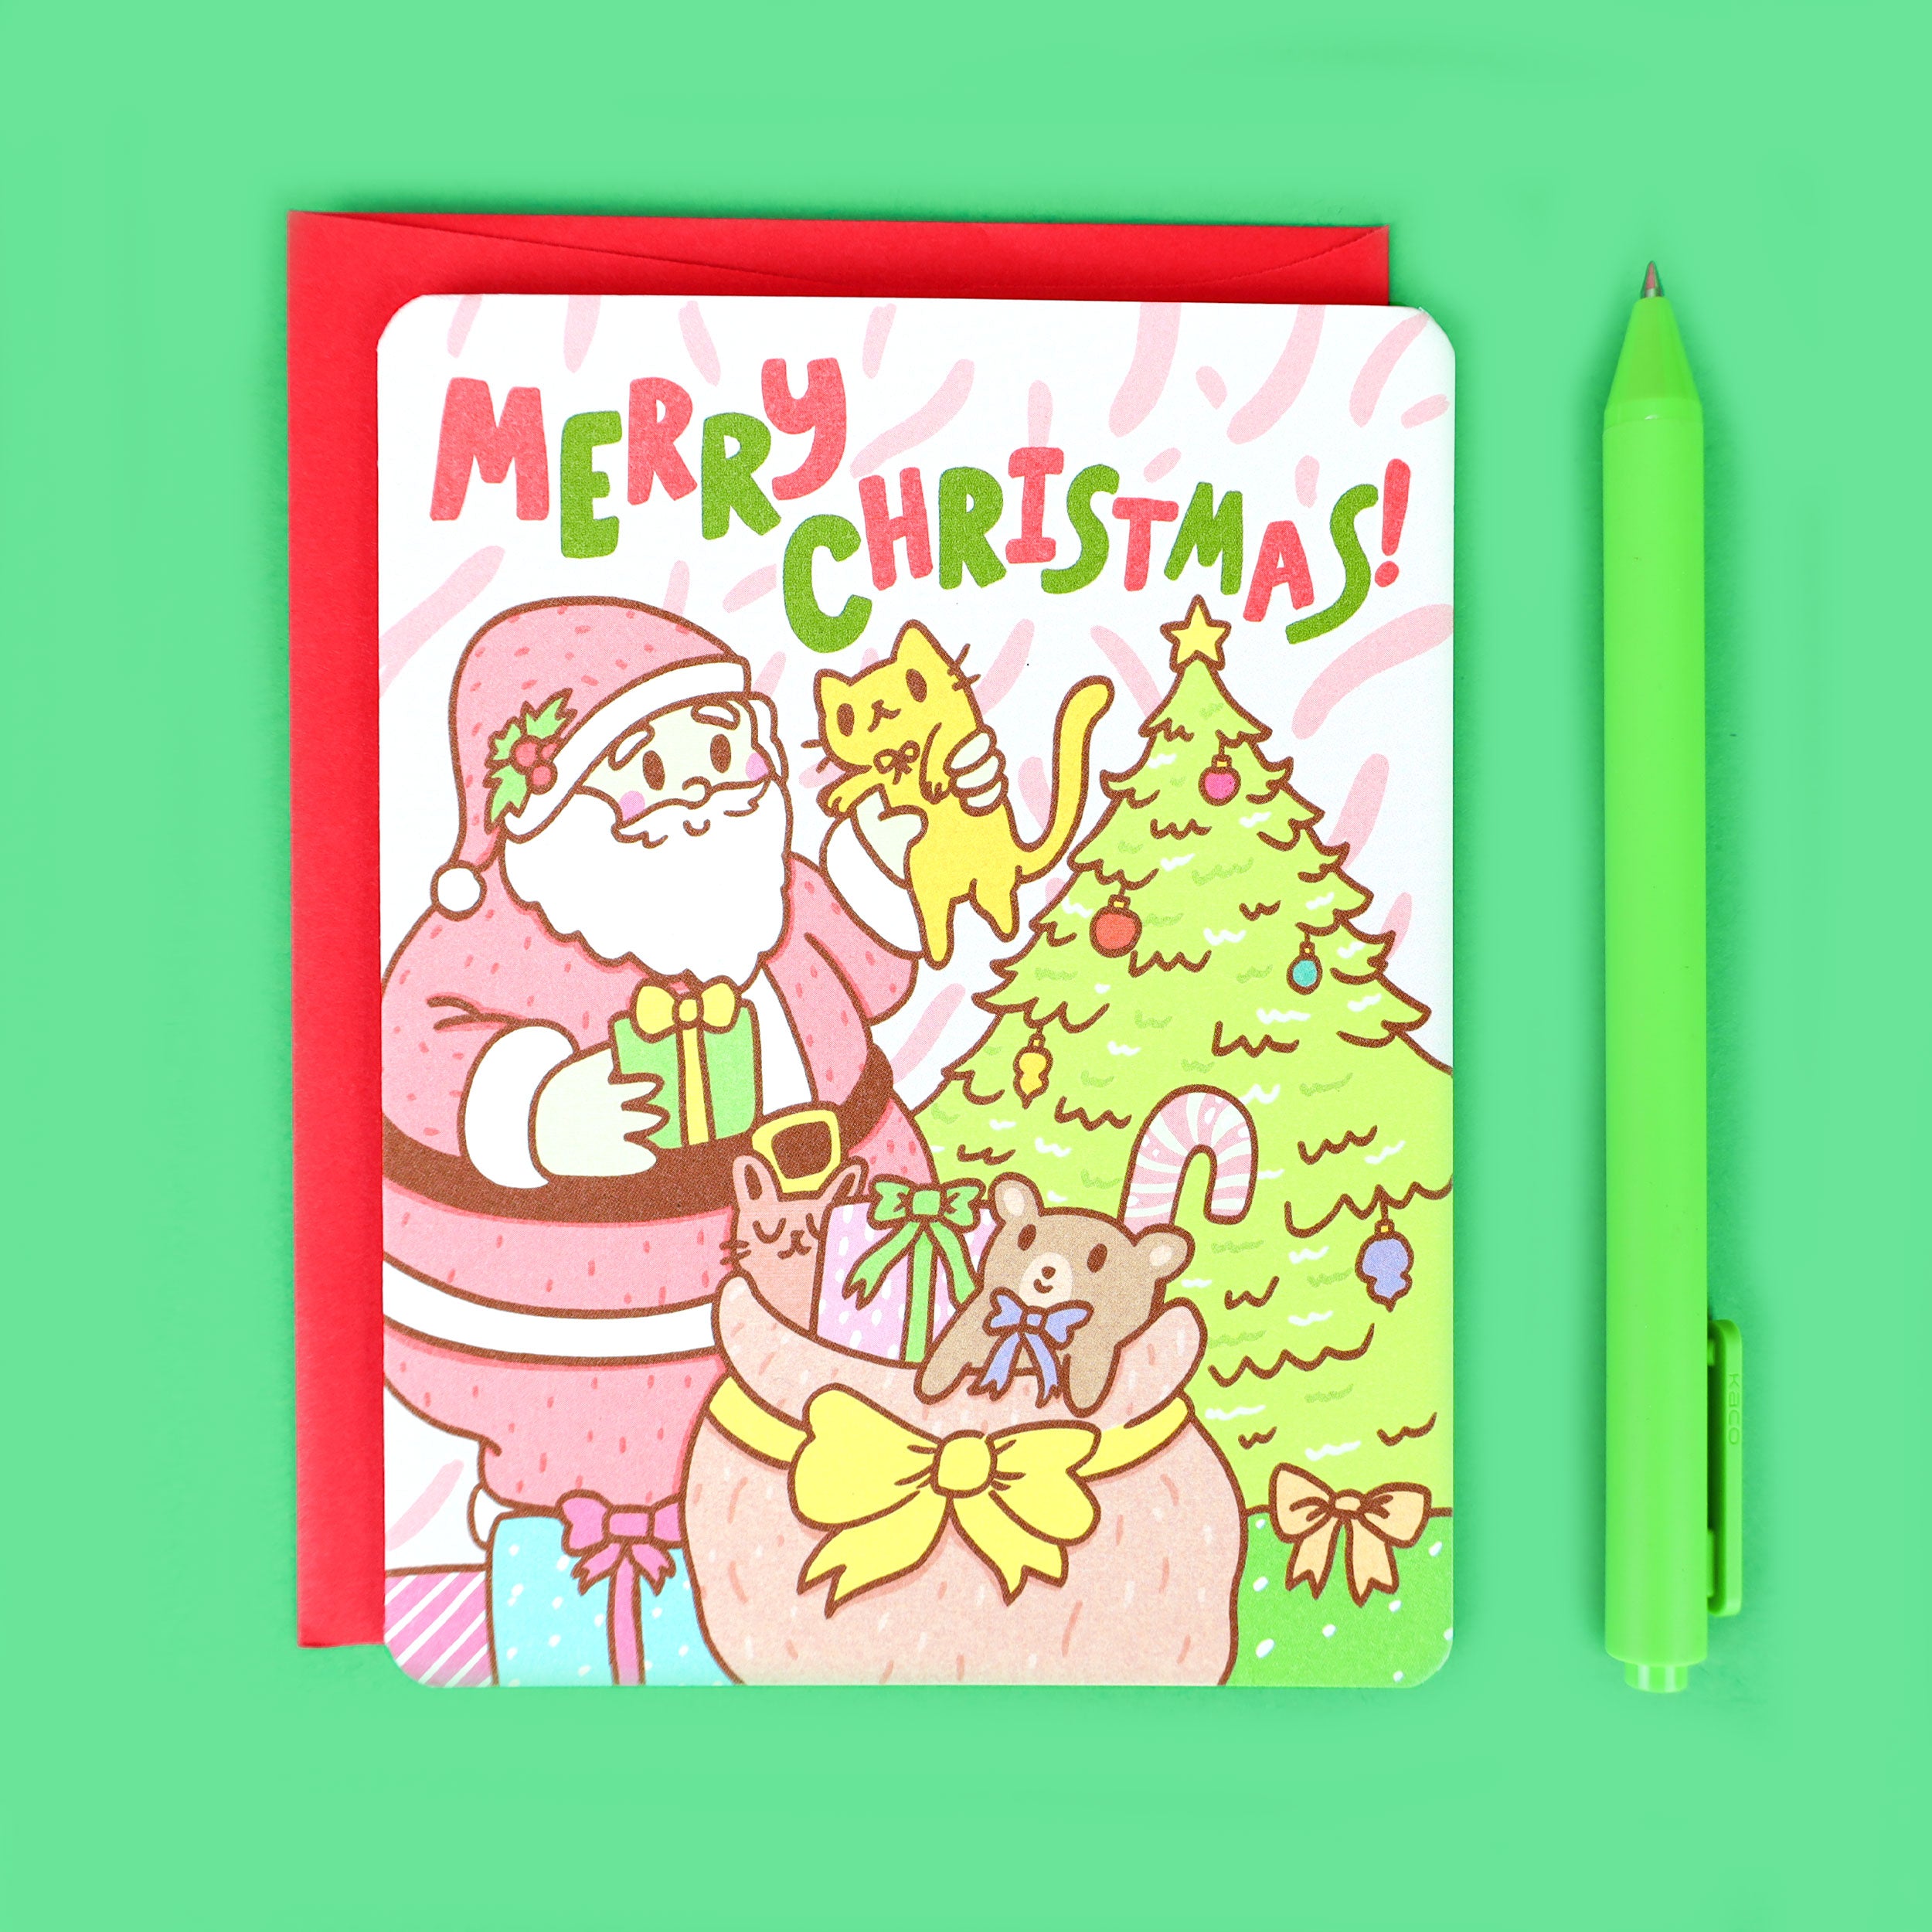 Merry Christmas Lettering Drawing High-Res Vector Graphic - Getty Images